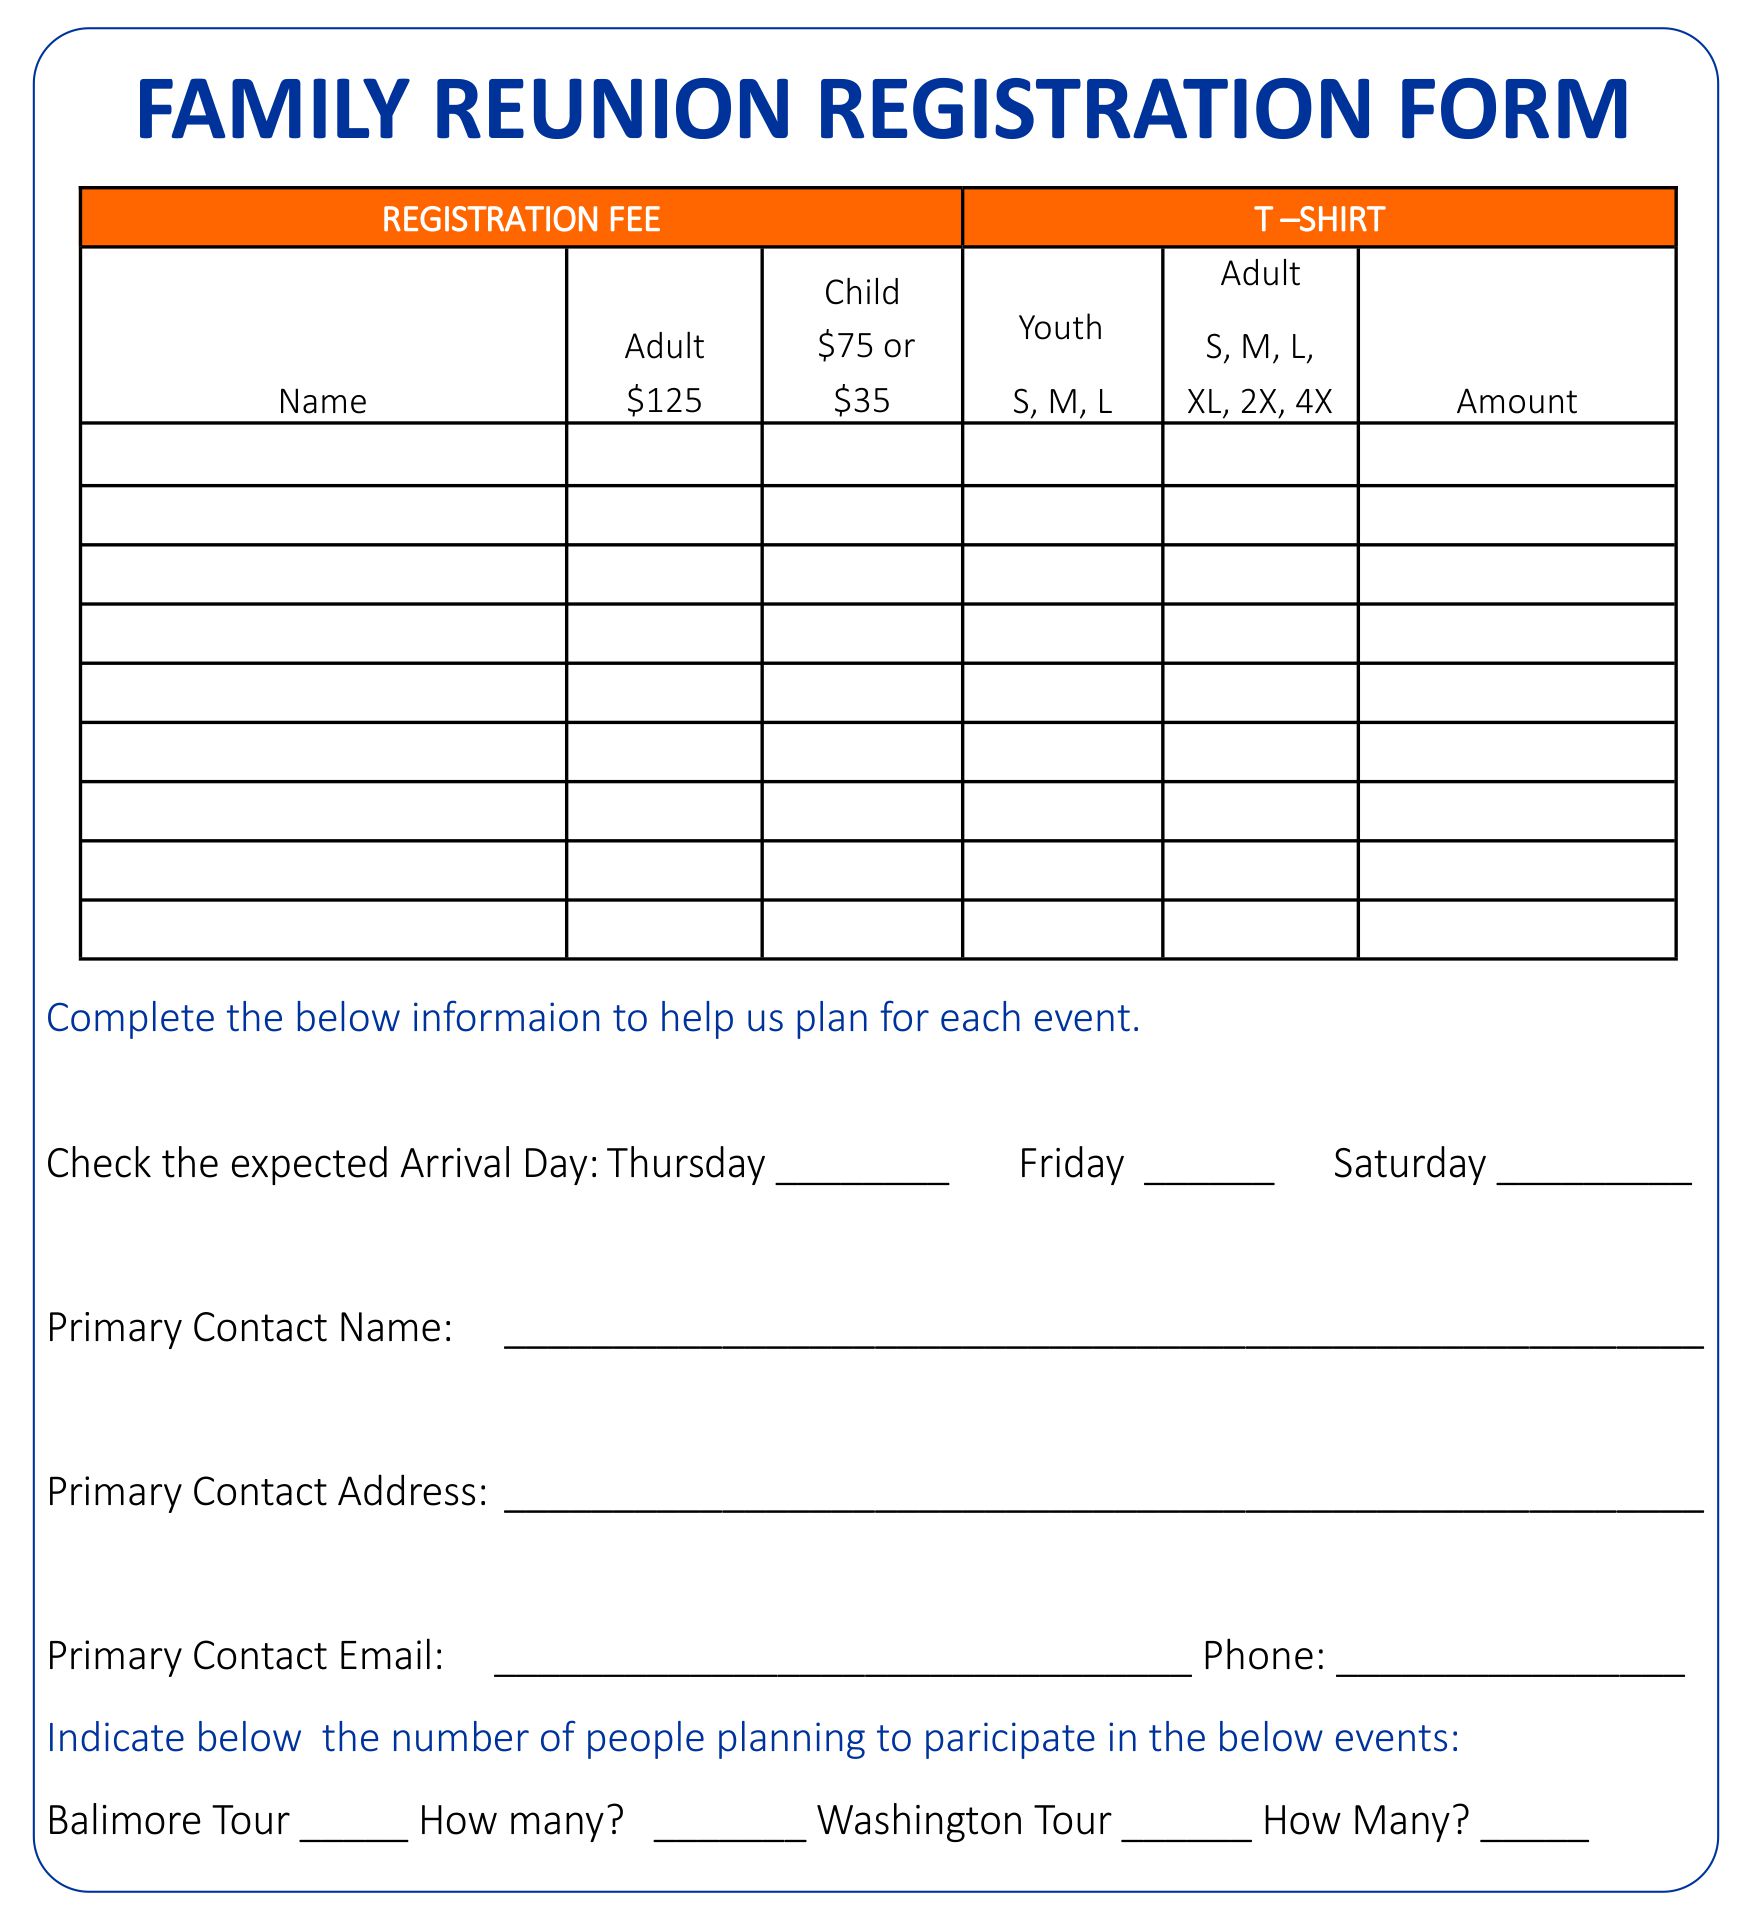 checklist for my family forms